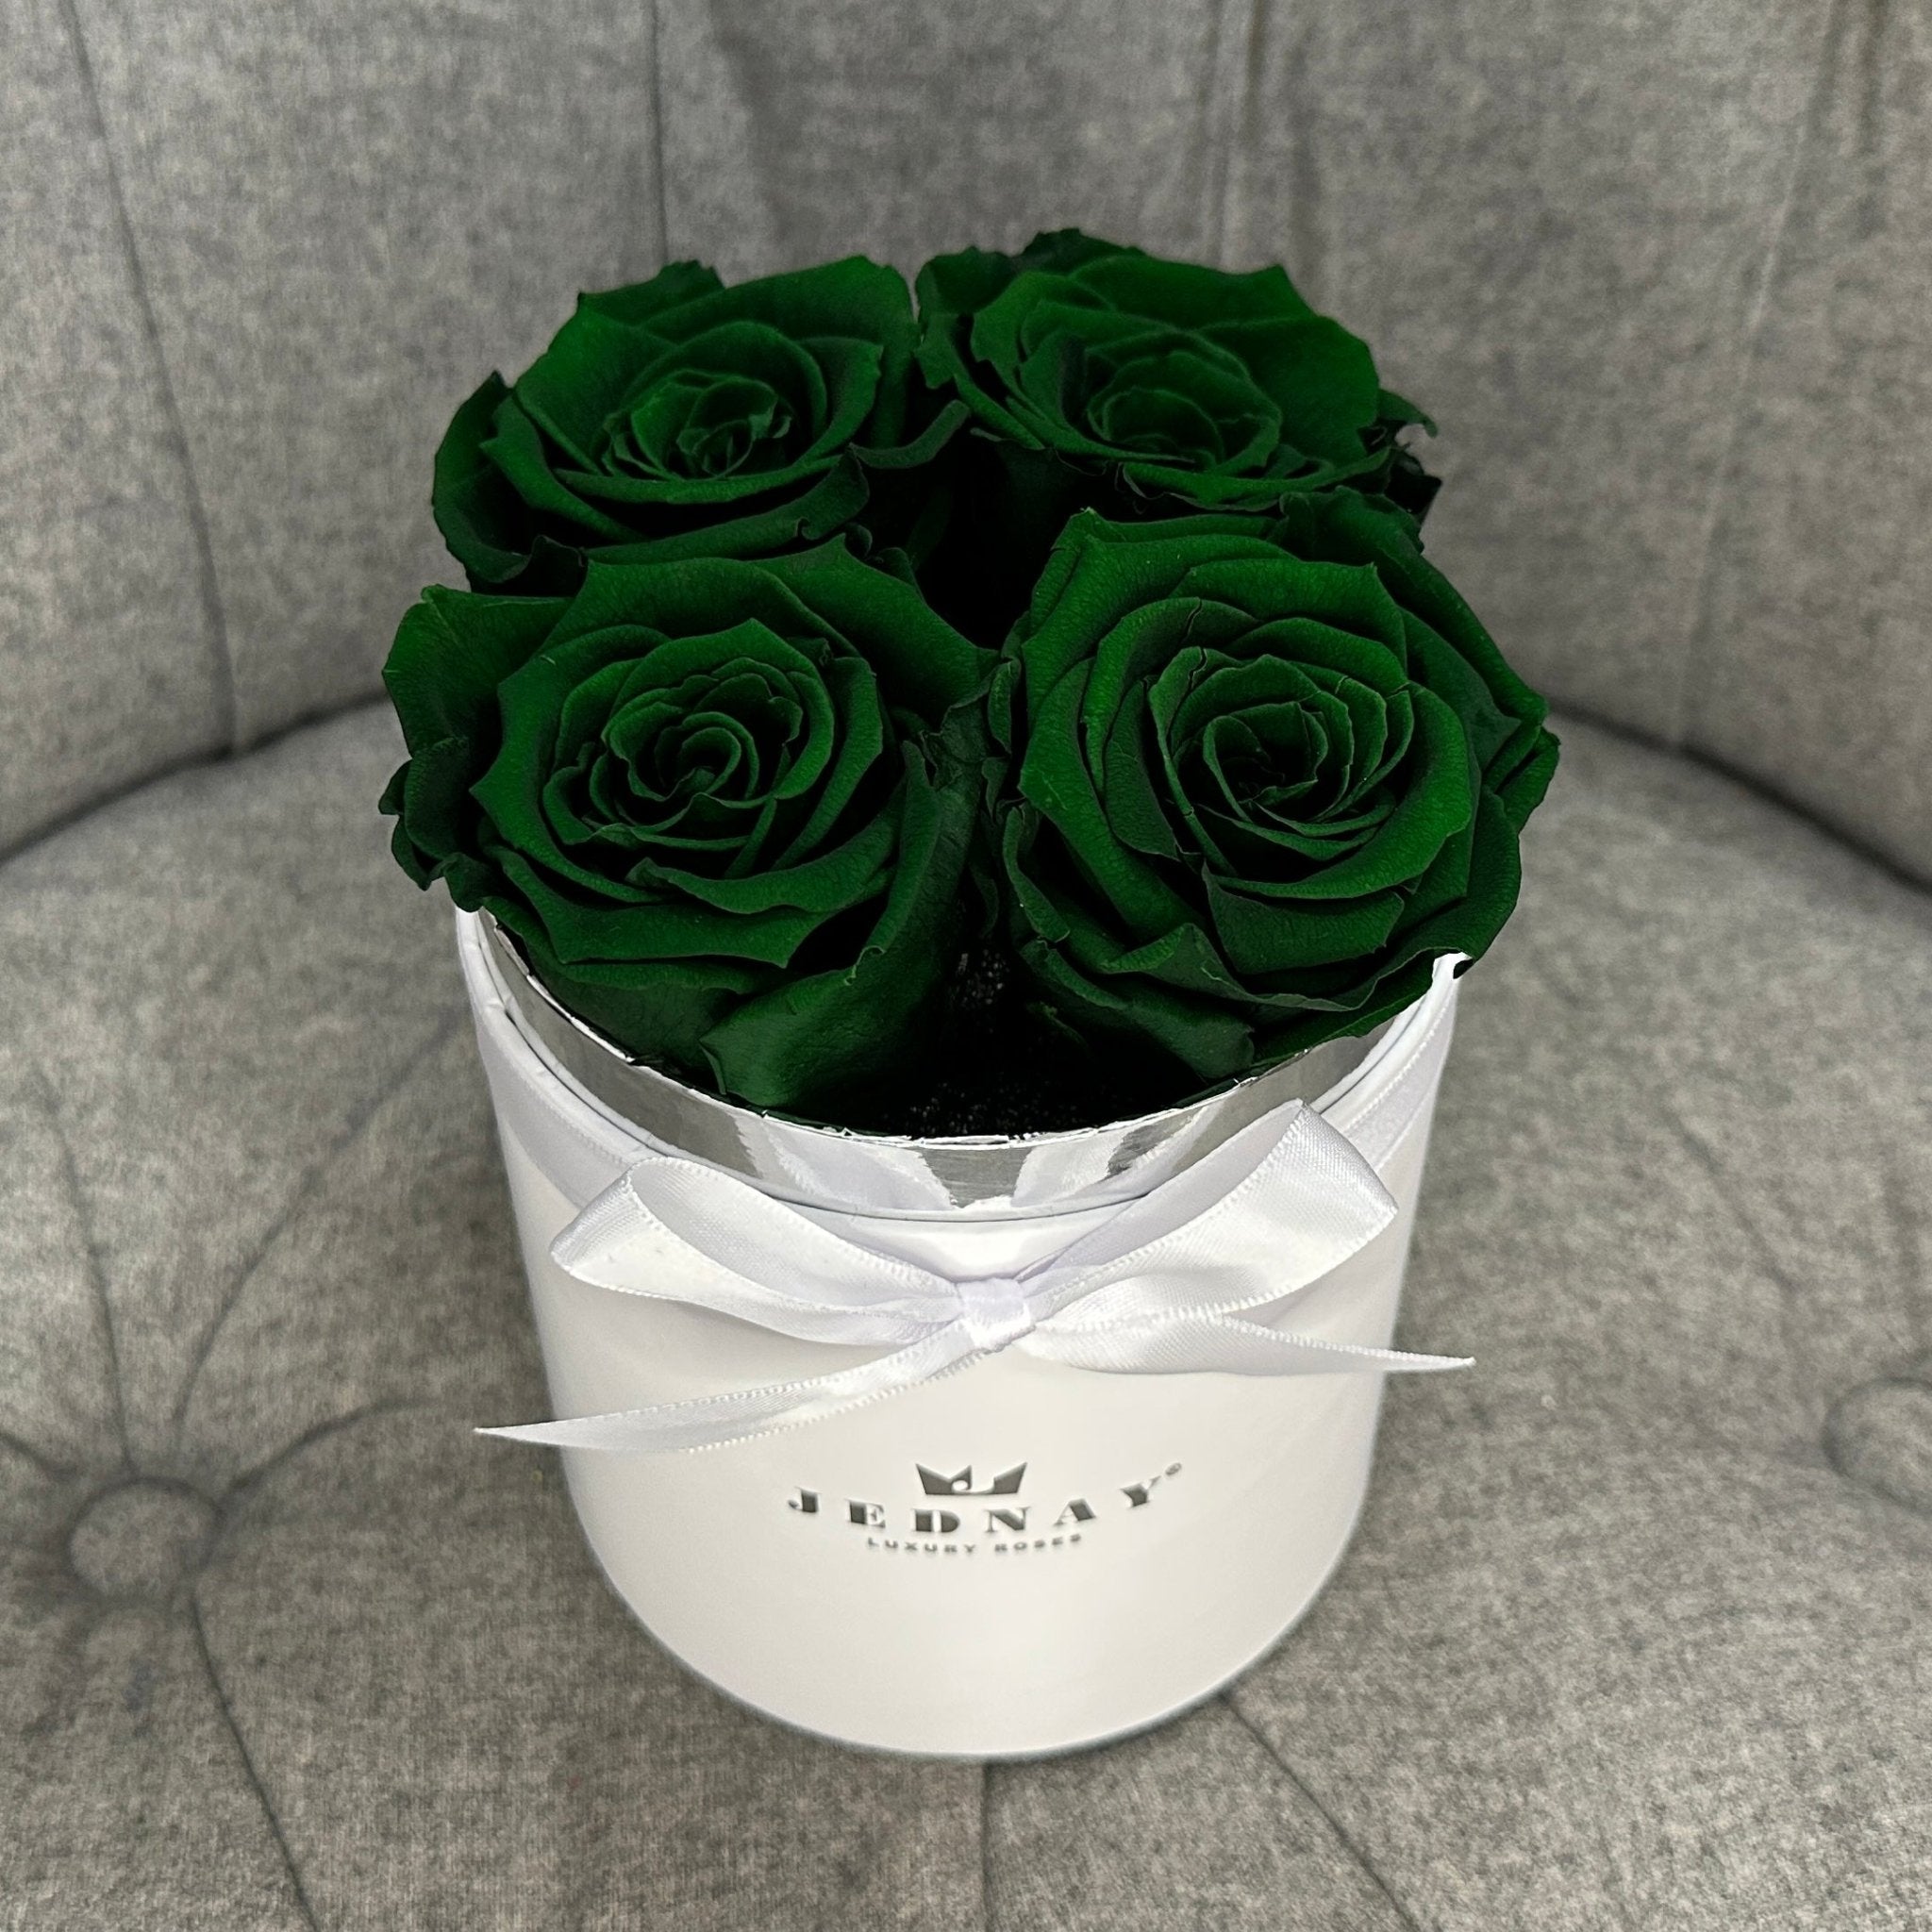 Petite Classic White Forever Rose Box - Deep Forest Green Eternal Roses - Jednay Roses